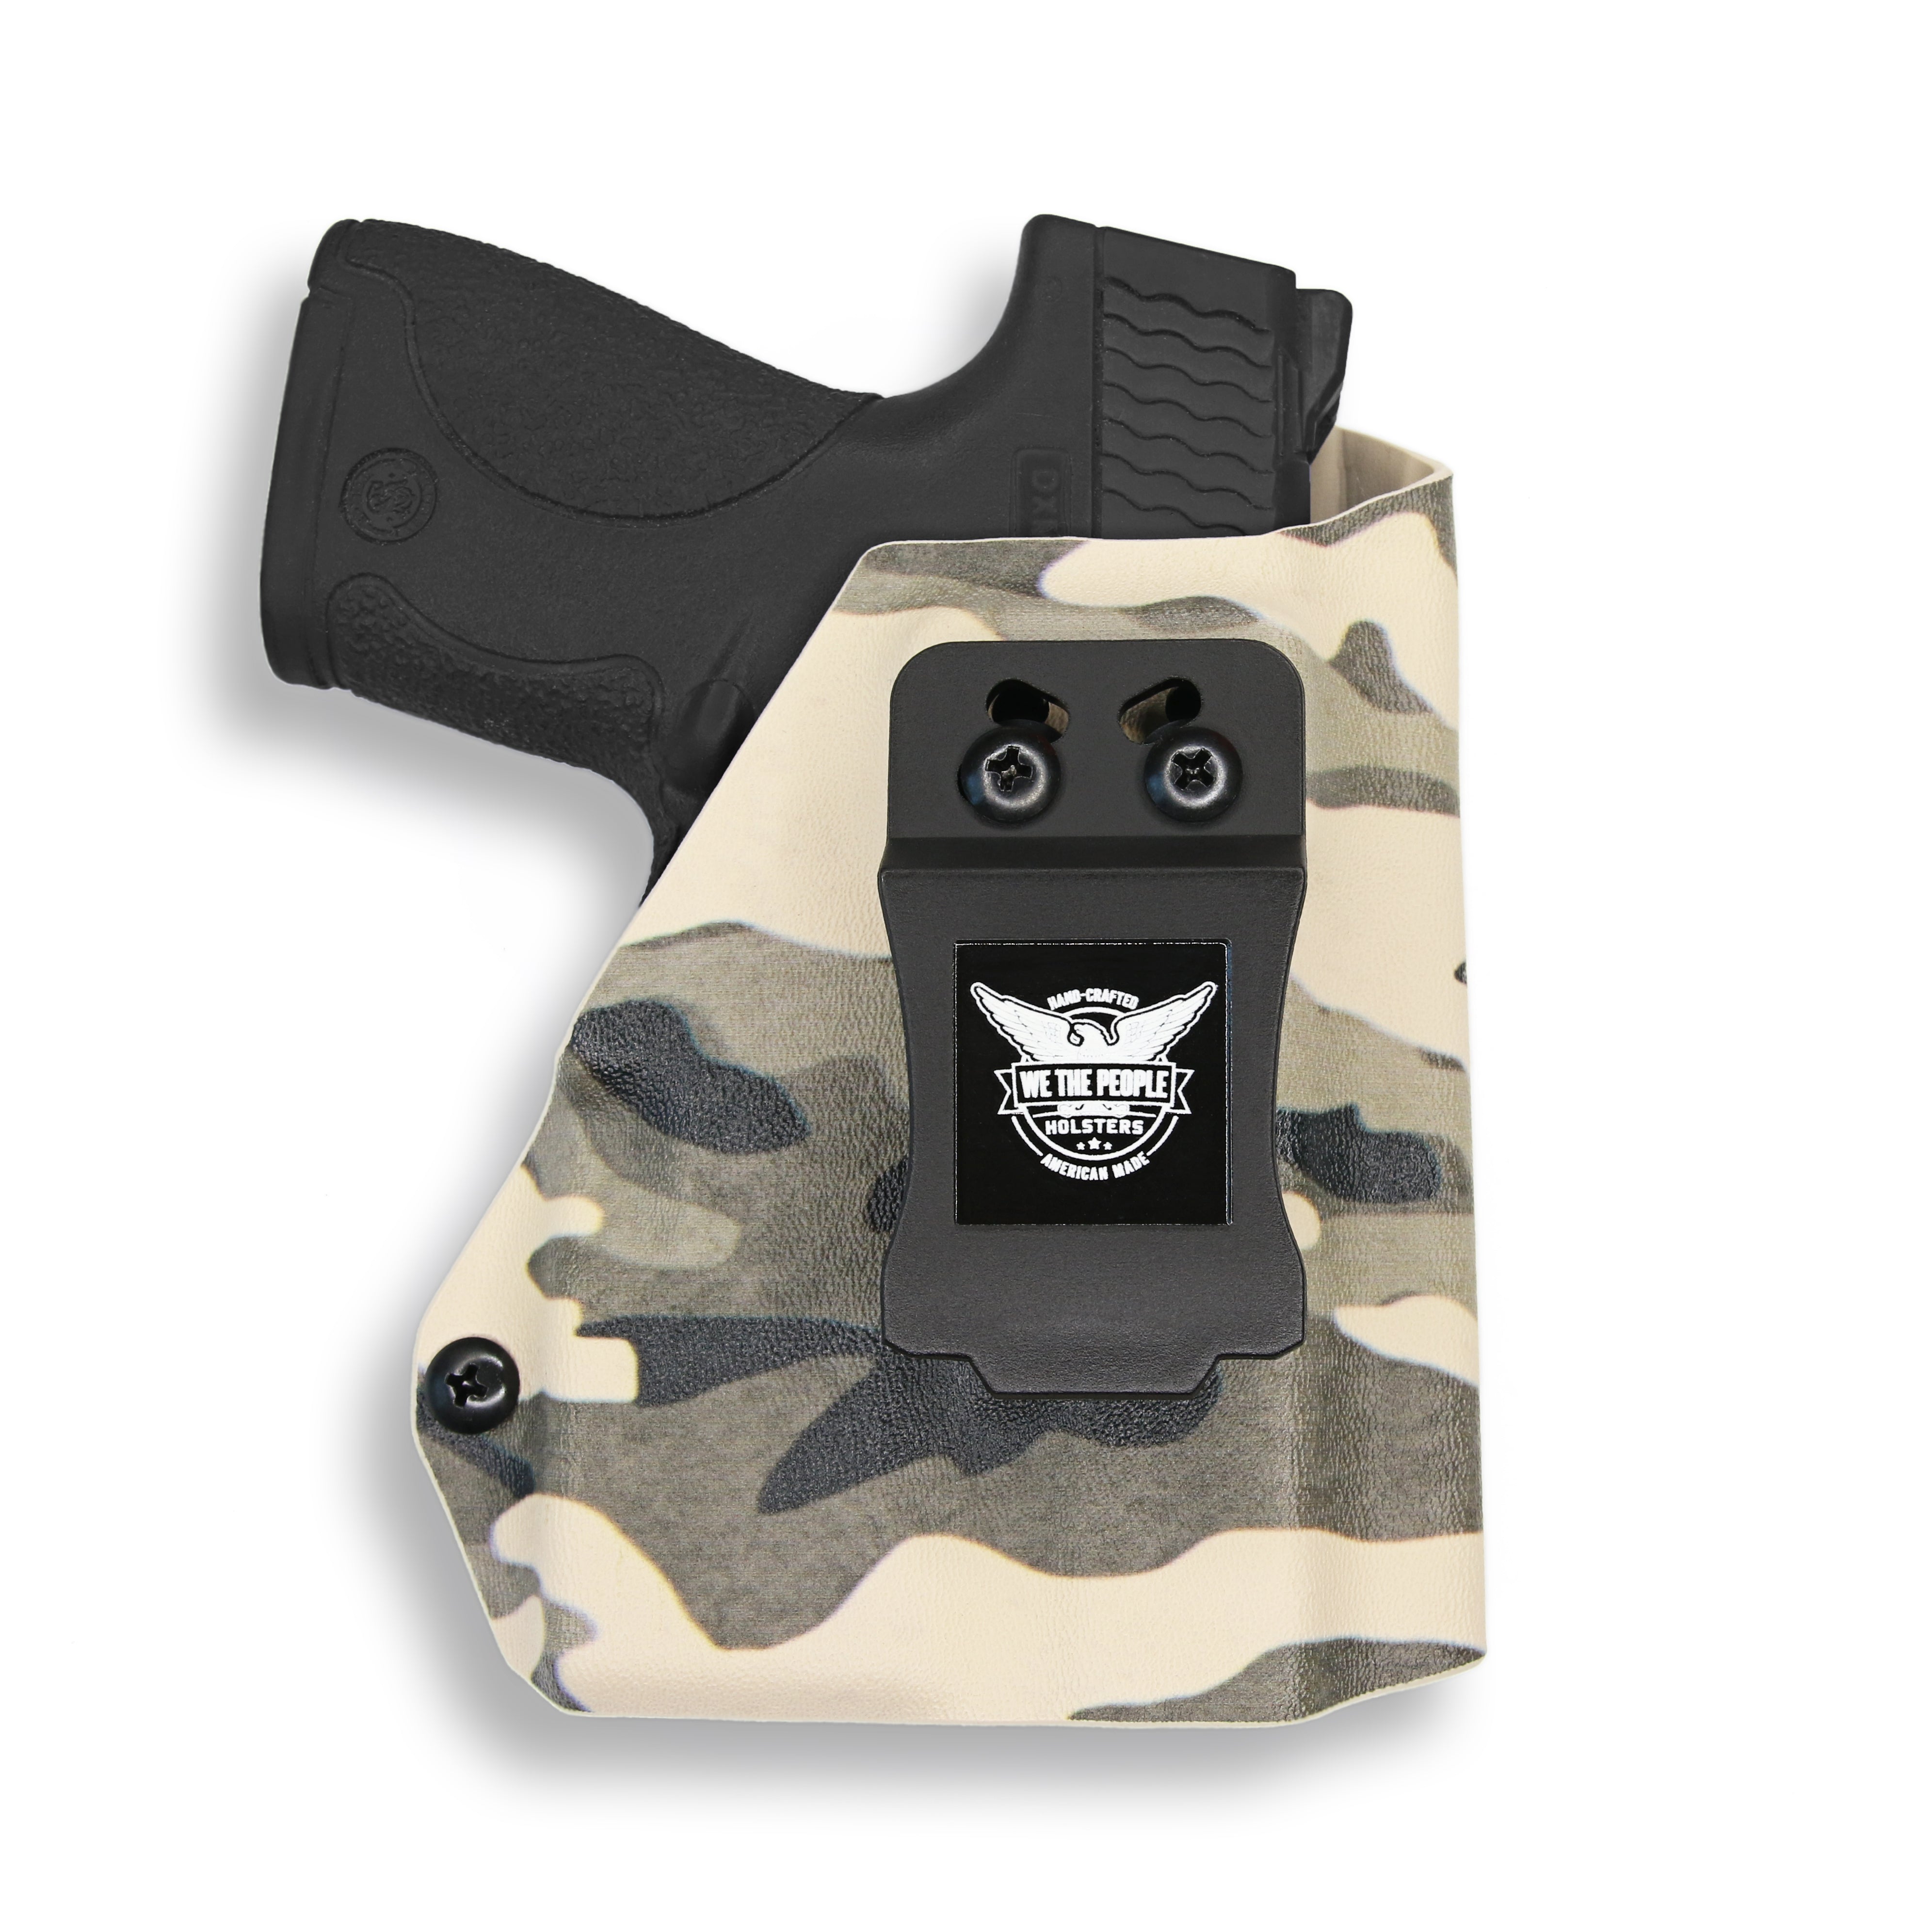 We The People Holsters - A little known secret, but this camo